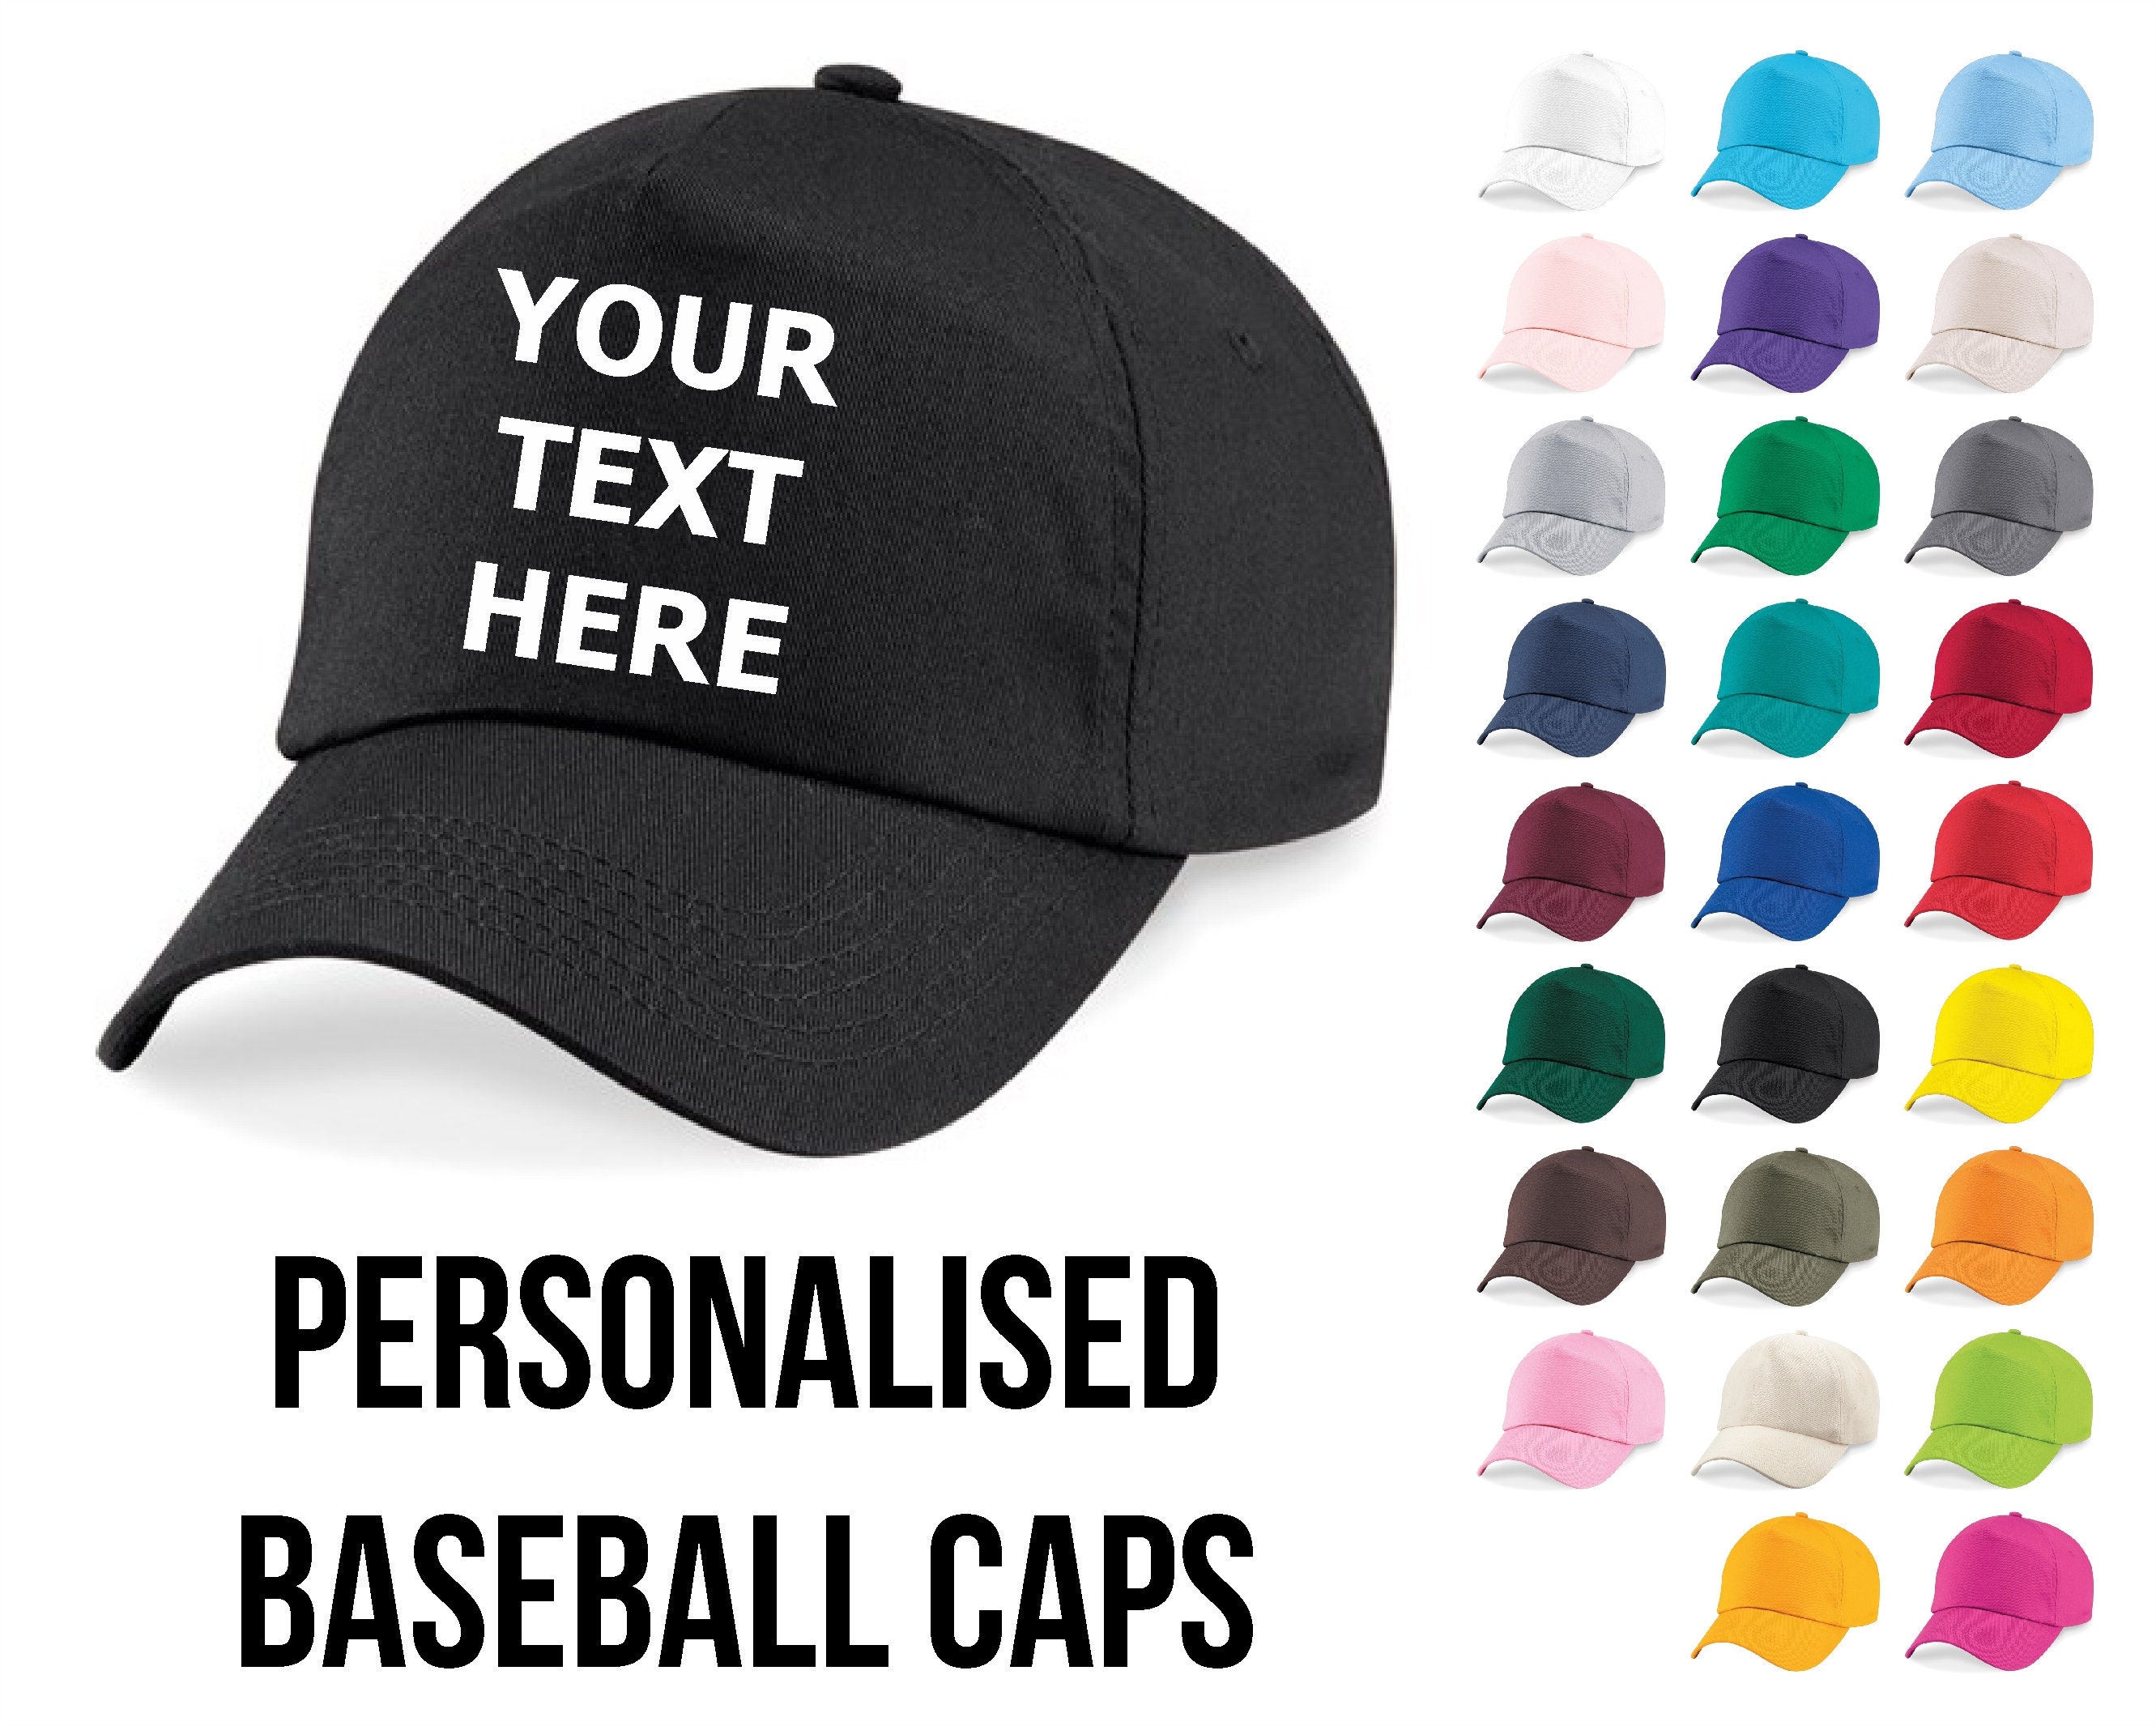 Personalised Embroidered Cap, Custom Baseball Hat, Personalized Dad Hat, Printed Logo, Mens Womens 5 Panel, Fitted Trucker Cap, Golf, Sports